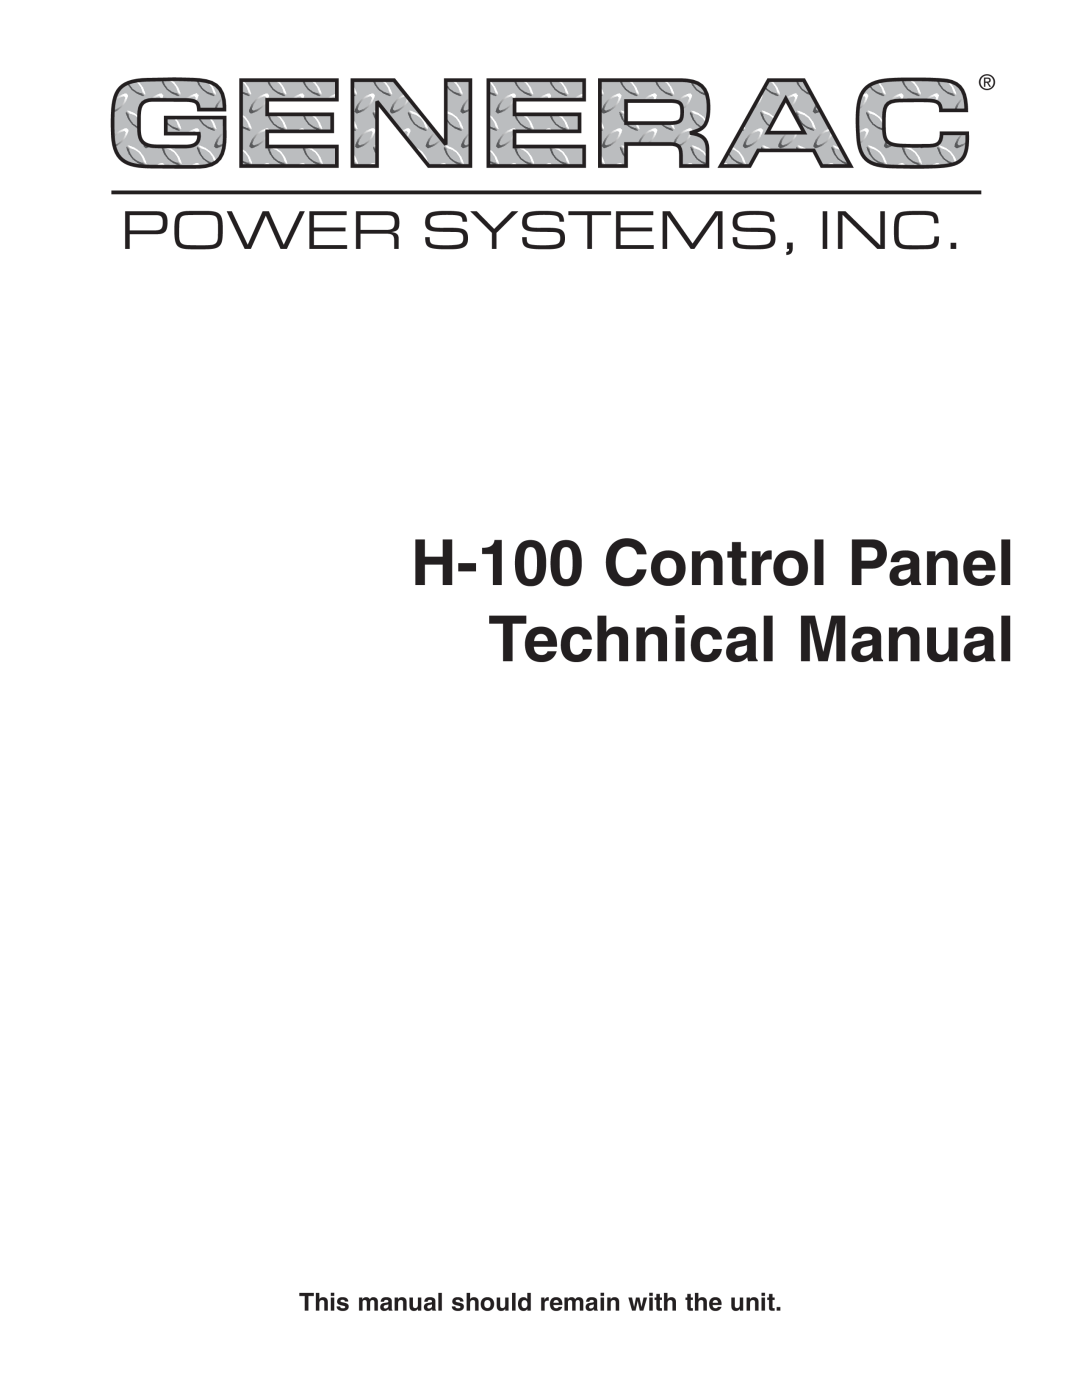 Generac Power Systems technical manual H-100Control Panel Technical Manual, Power Systems, Inc 